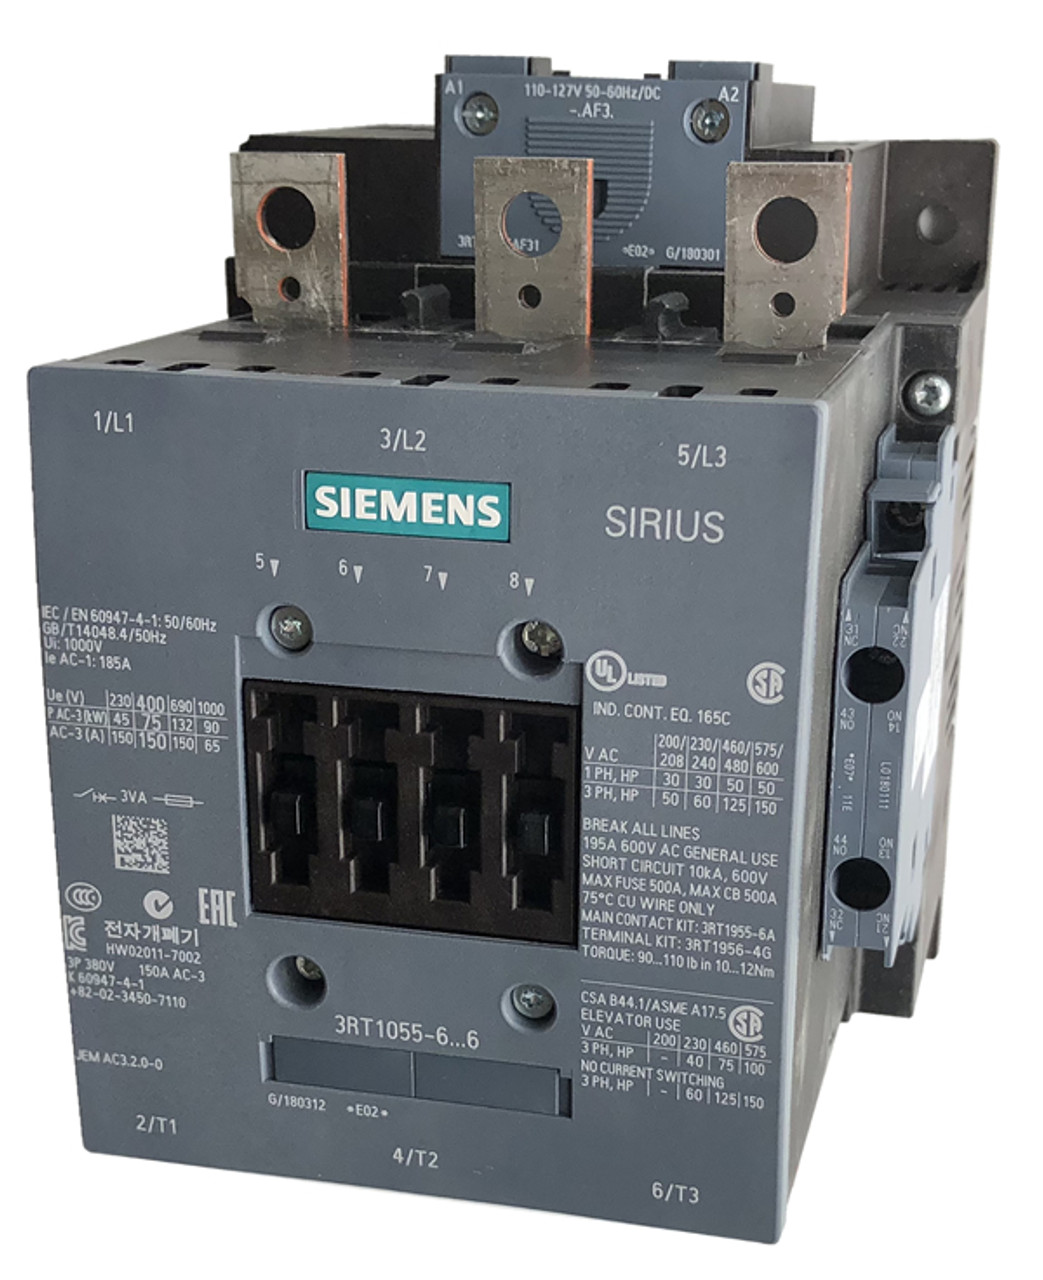 AC 40-60Hz S6 Frame Size 2 NC Auxilliary Contacts 3 Poles 150 AC3 Amp Rating Conventional Coil Screw Terminals DC 440-480V 3RT10556AR36 Siemens 3RT10 55-6AR36 Motor Contactor 2 NO